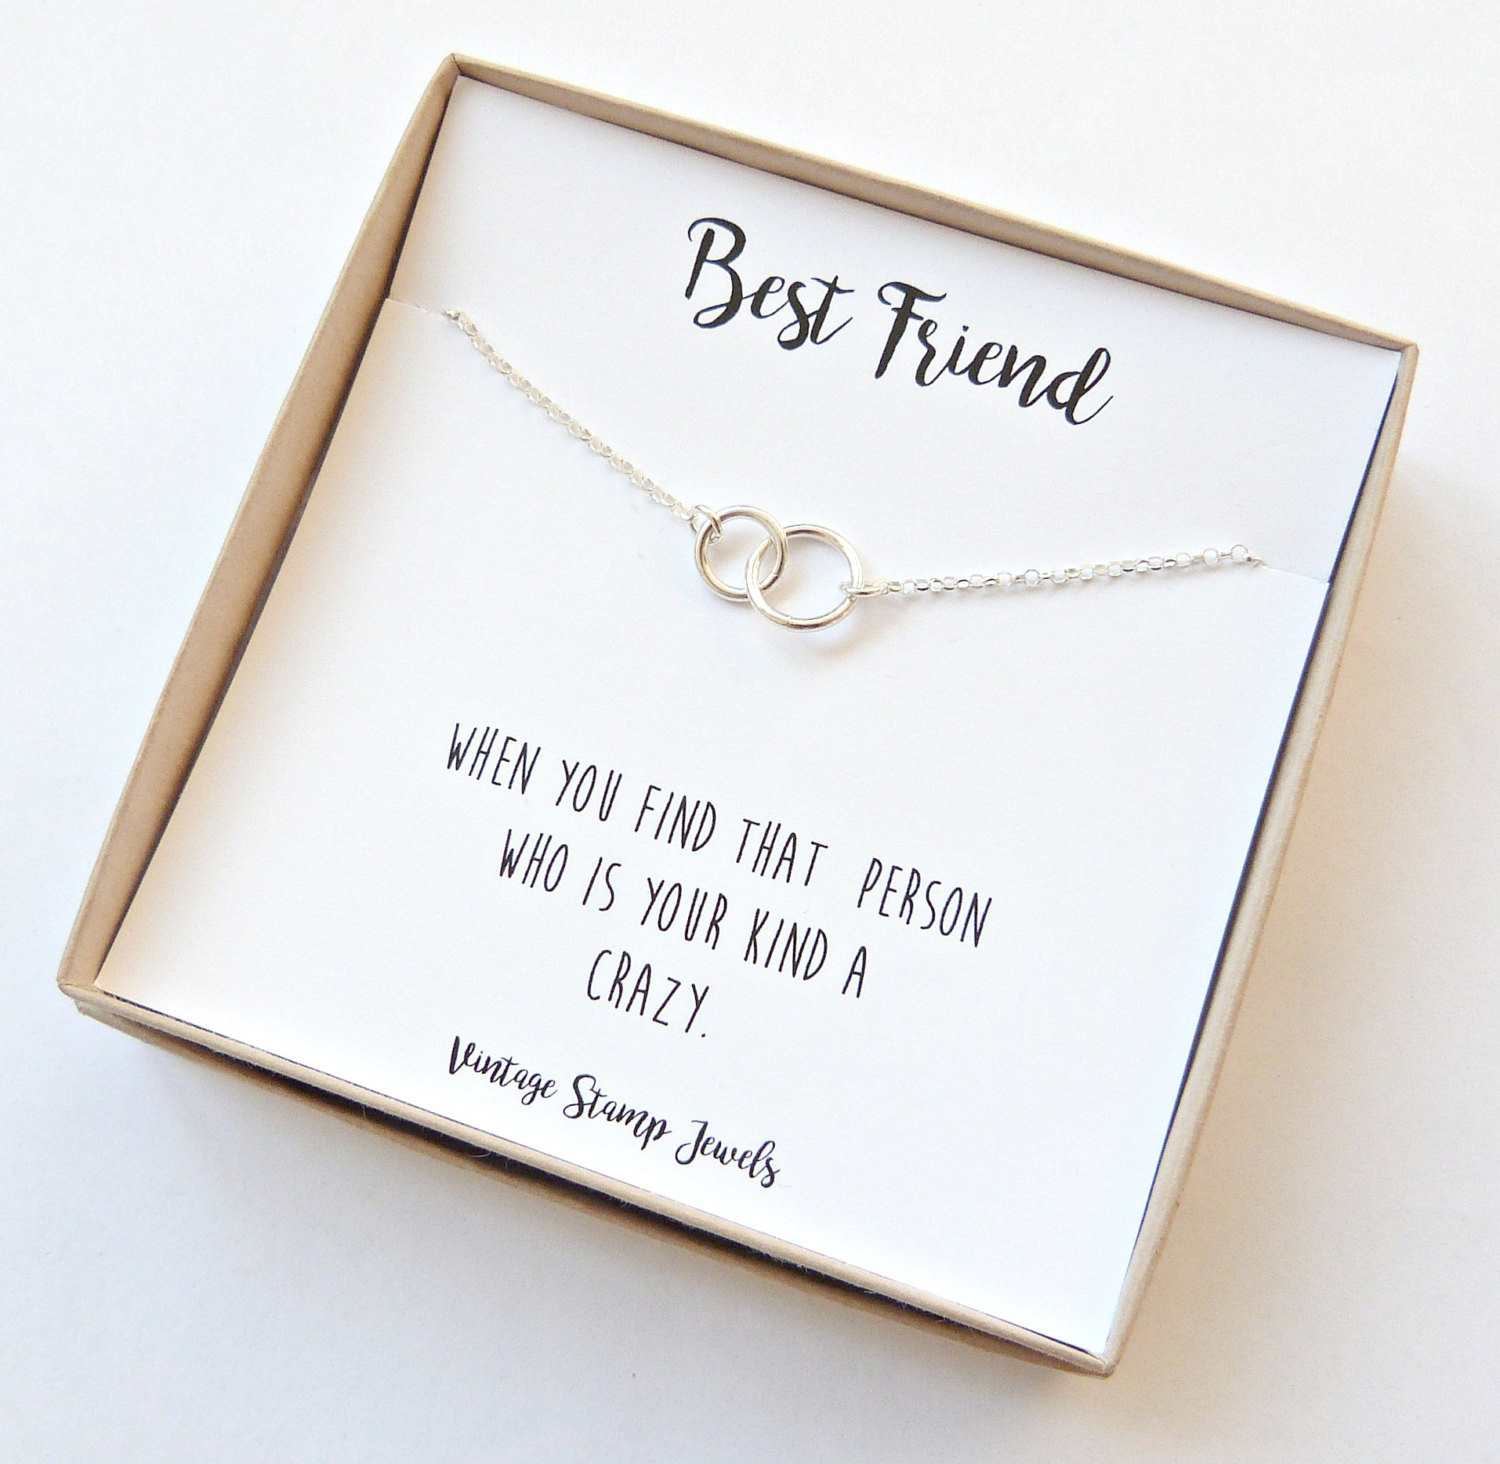 Best Friends Geschenke
 Eternity Necklace Gold Necklace Gift Box Silver circle